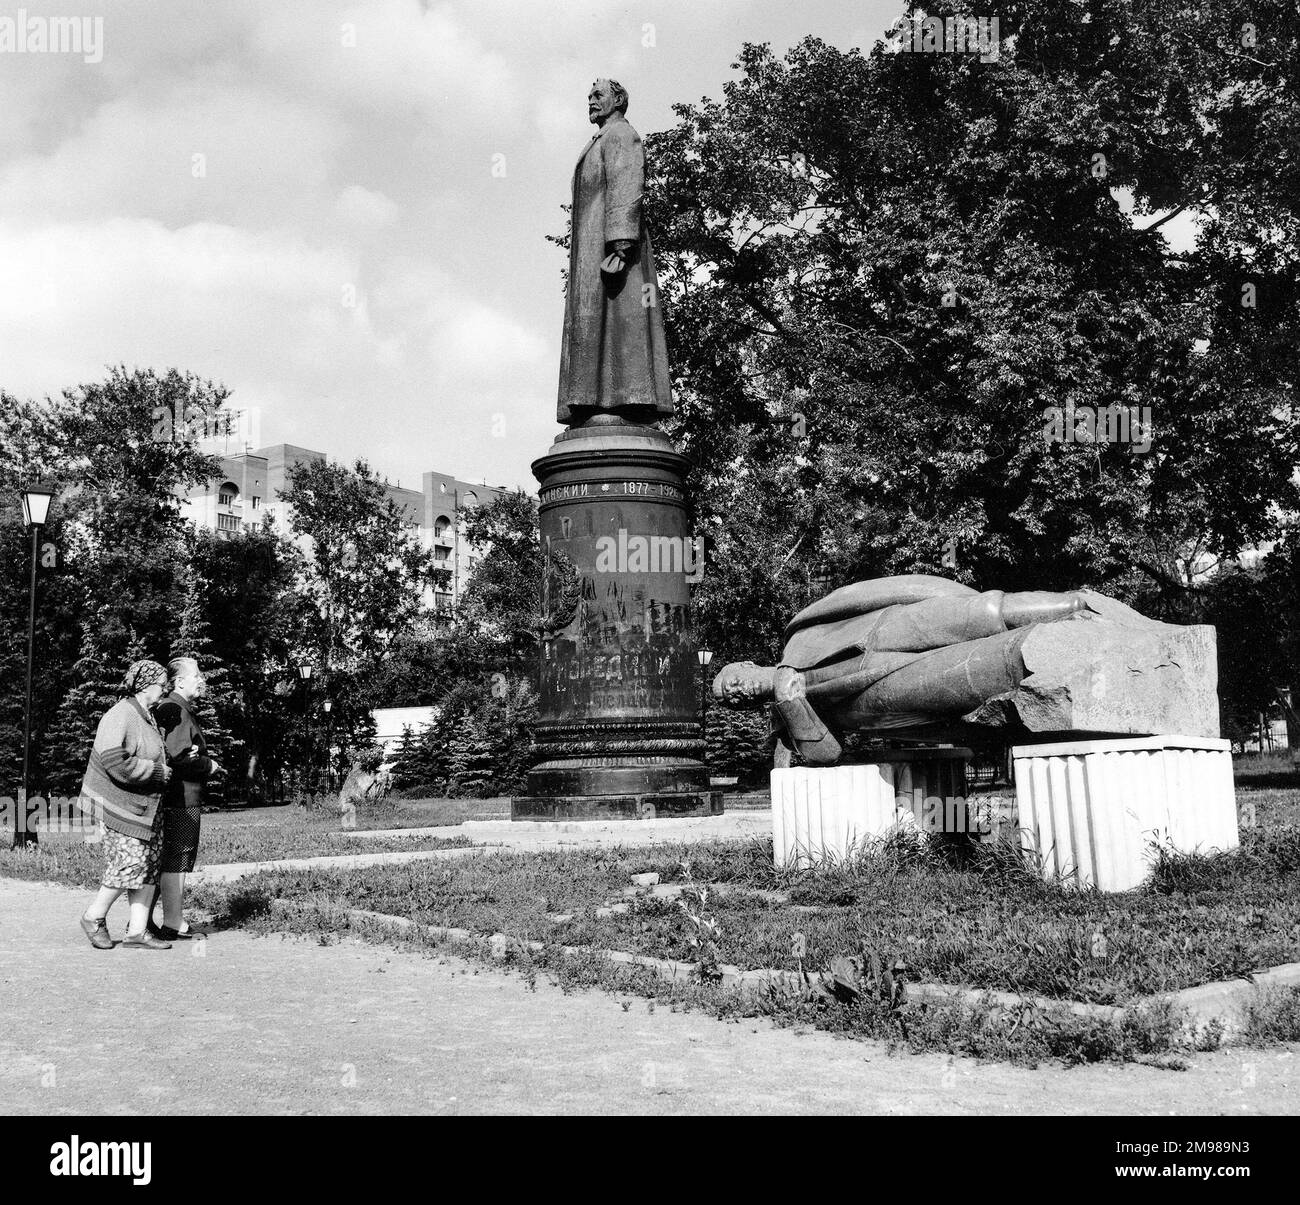 Two women view statues in the Muzeon Sculpture Park, Moscow, Russia. In the centre is a statue of Felix Dzerzhinsky (1877-1926), Polish-Russian agitator and head of the secret police. The statue on the right, lying on its side, appears to be of Josef Stalin. Stock Photo